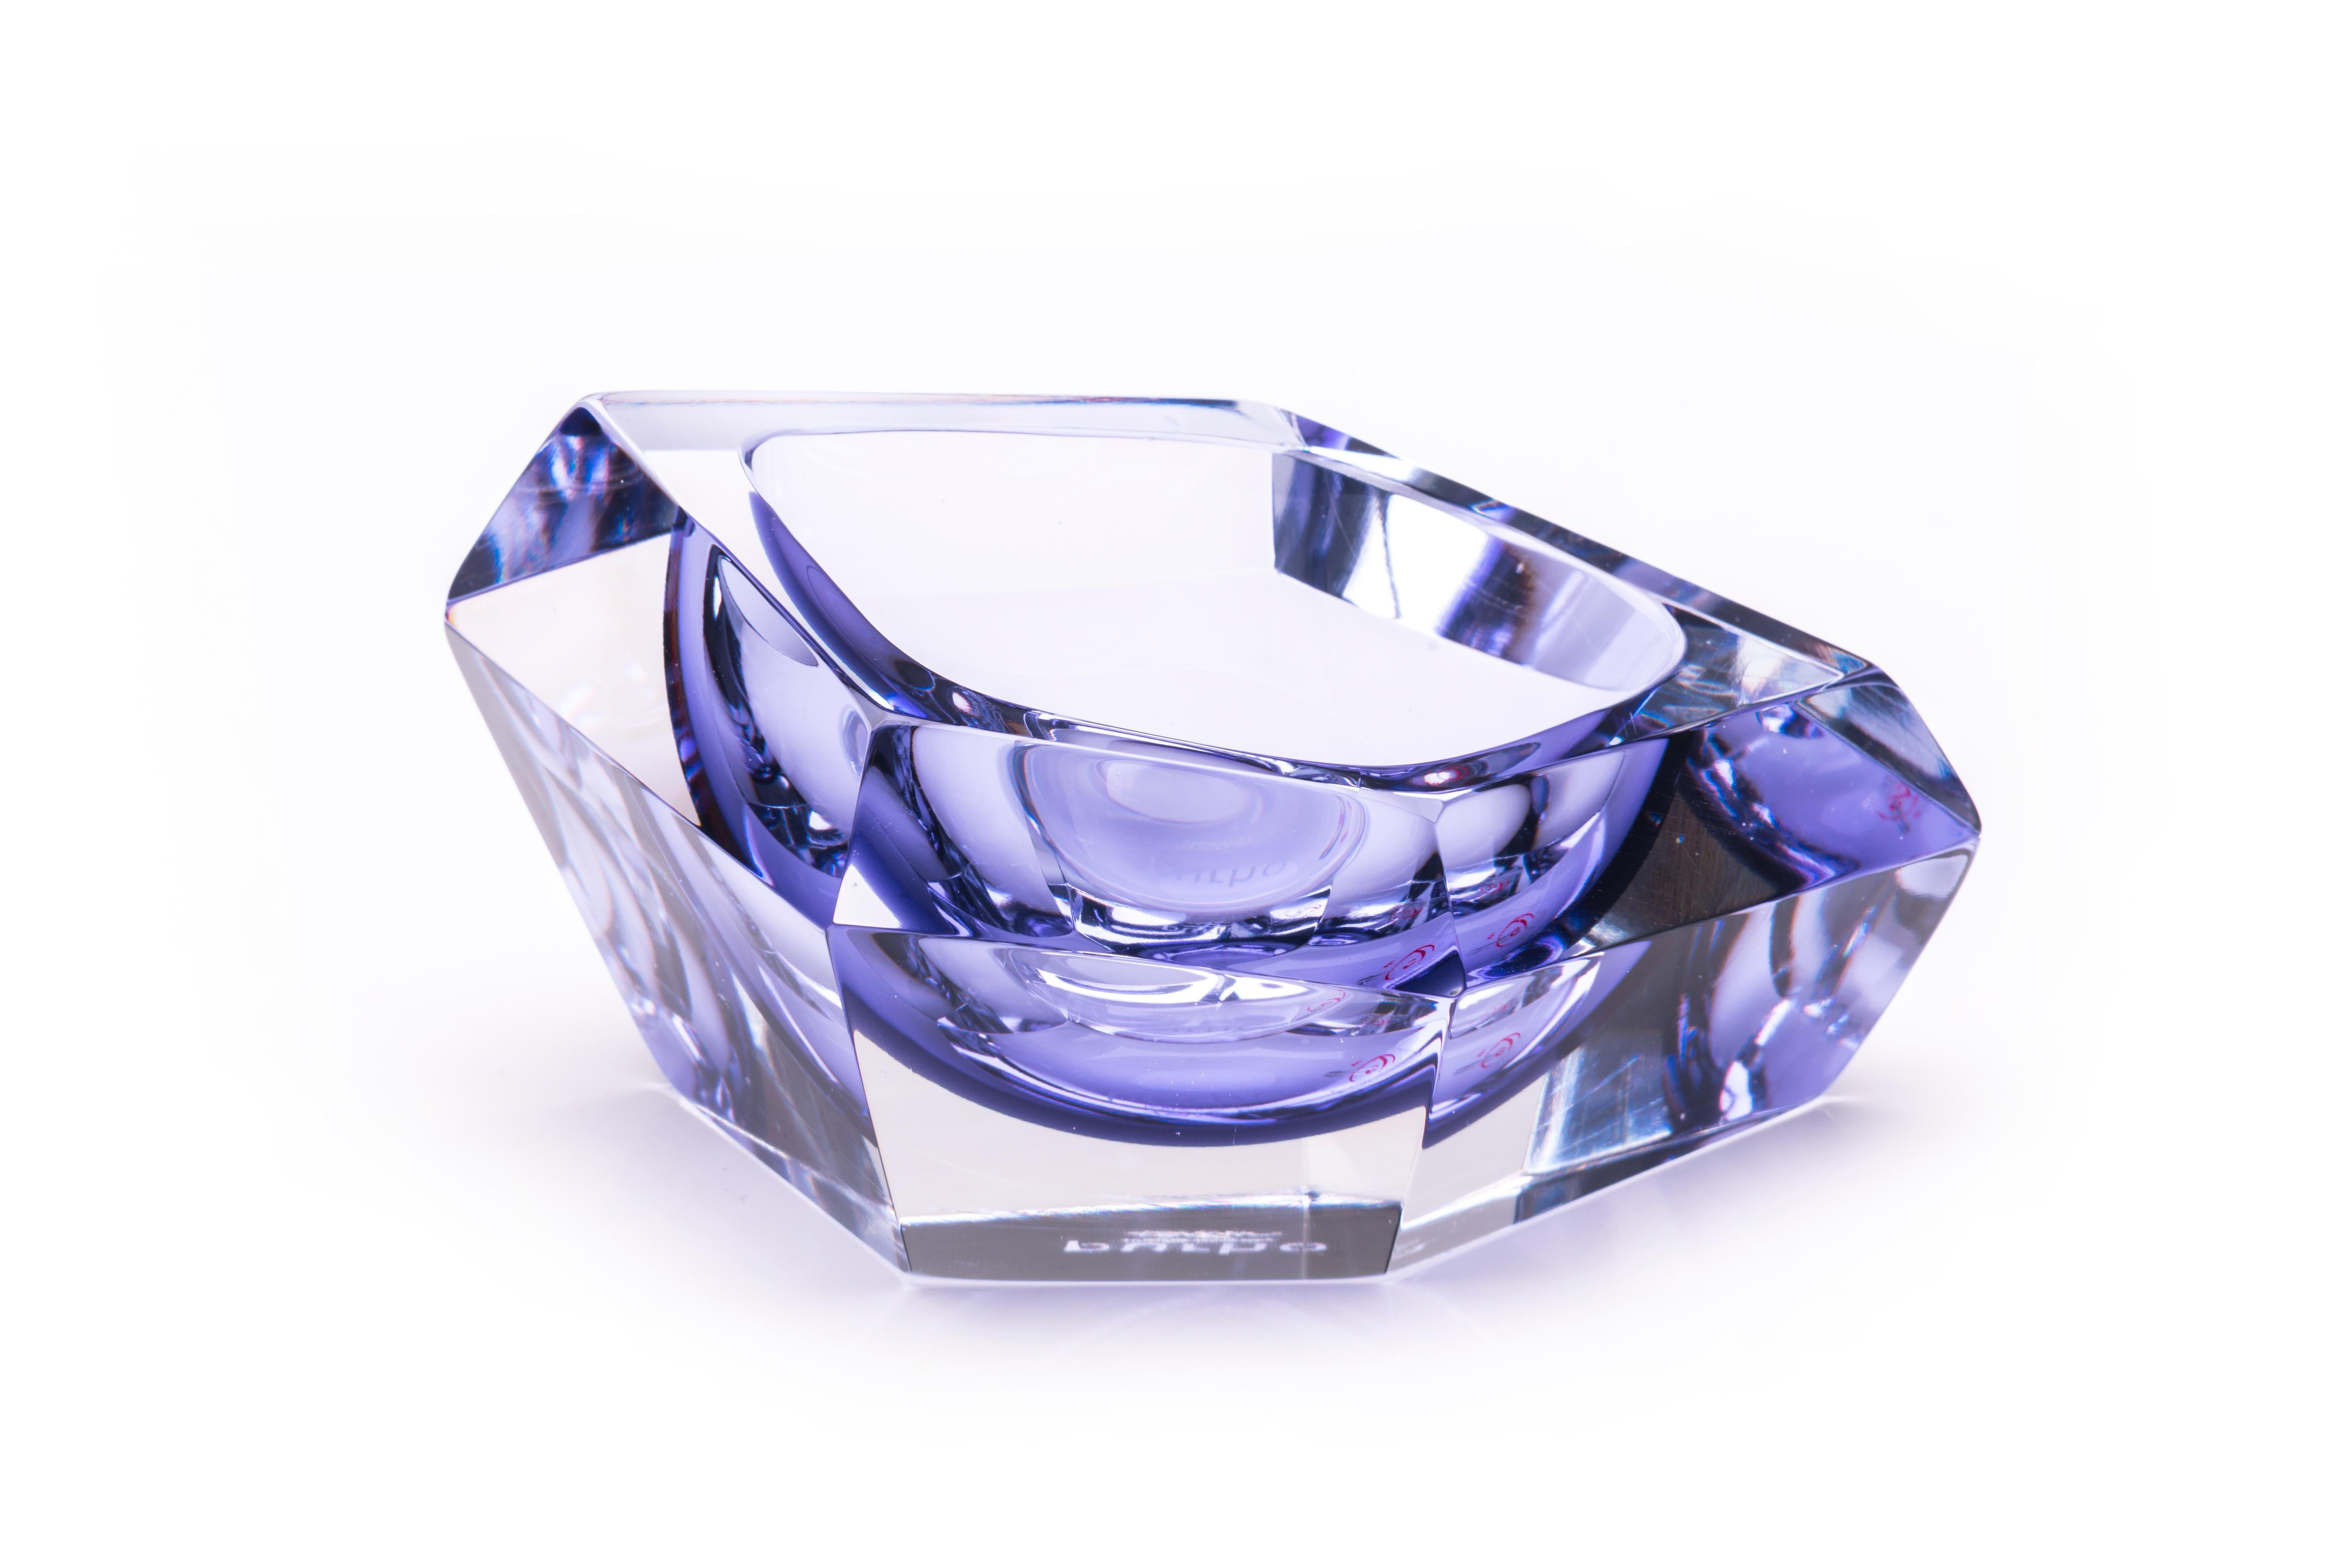 Kastle mini bowl, Murano glass, by Karim Rashid, 21st century.
Karim Rashid has conceived for Purho a mini collection of bowls and vases characterized by their faceted, structural form and abstract elegance. Irresistible because of the unusual and